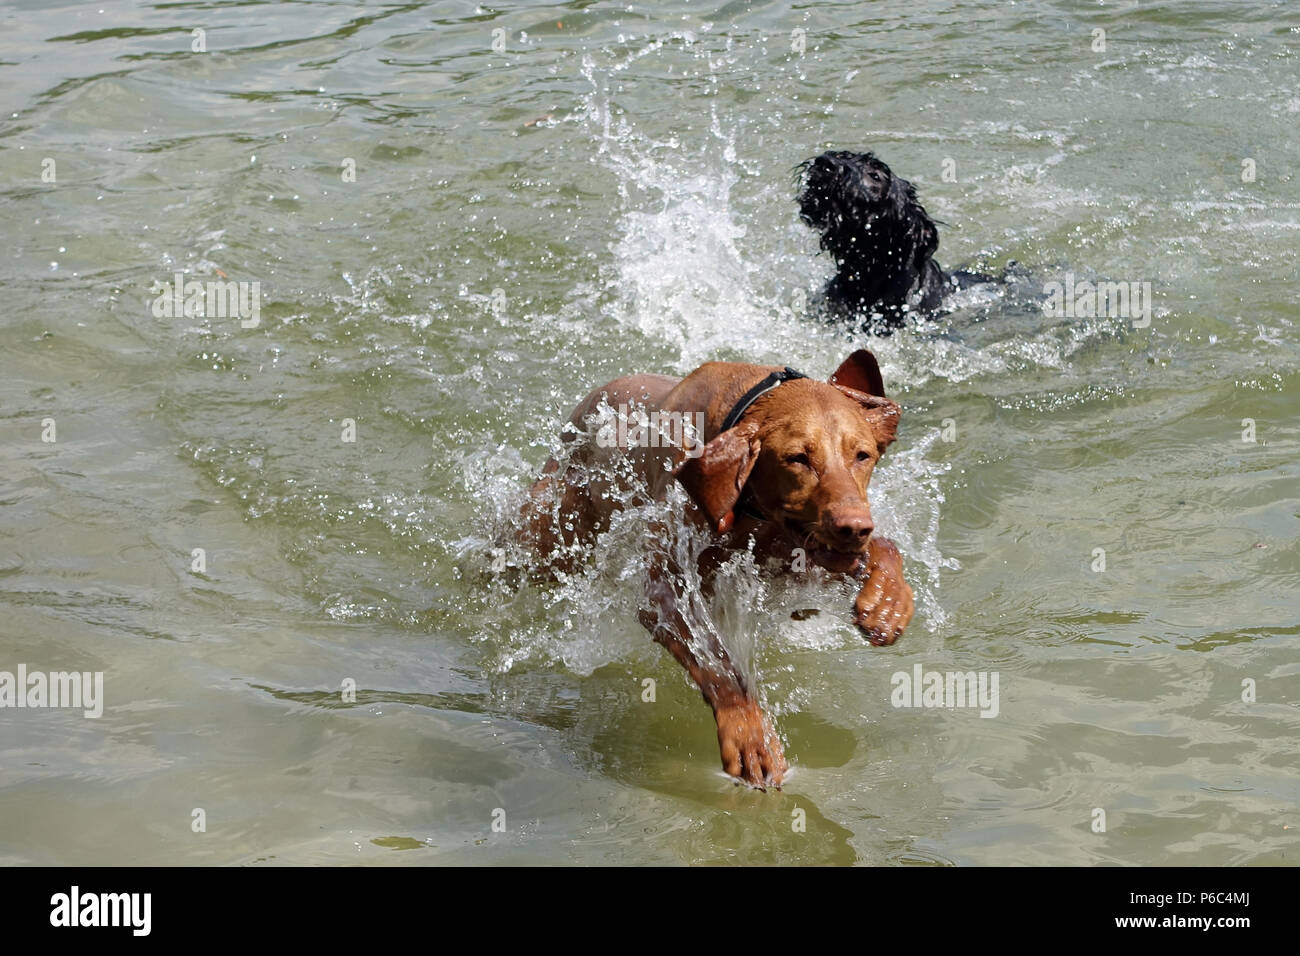 Berlin, Germany - Dogs are bathing in the Schlachtensee Stock Photo